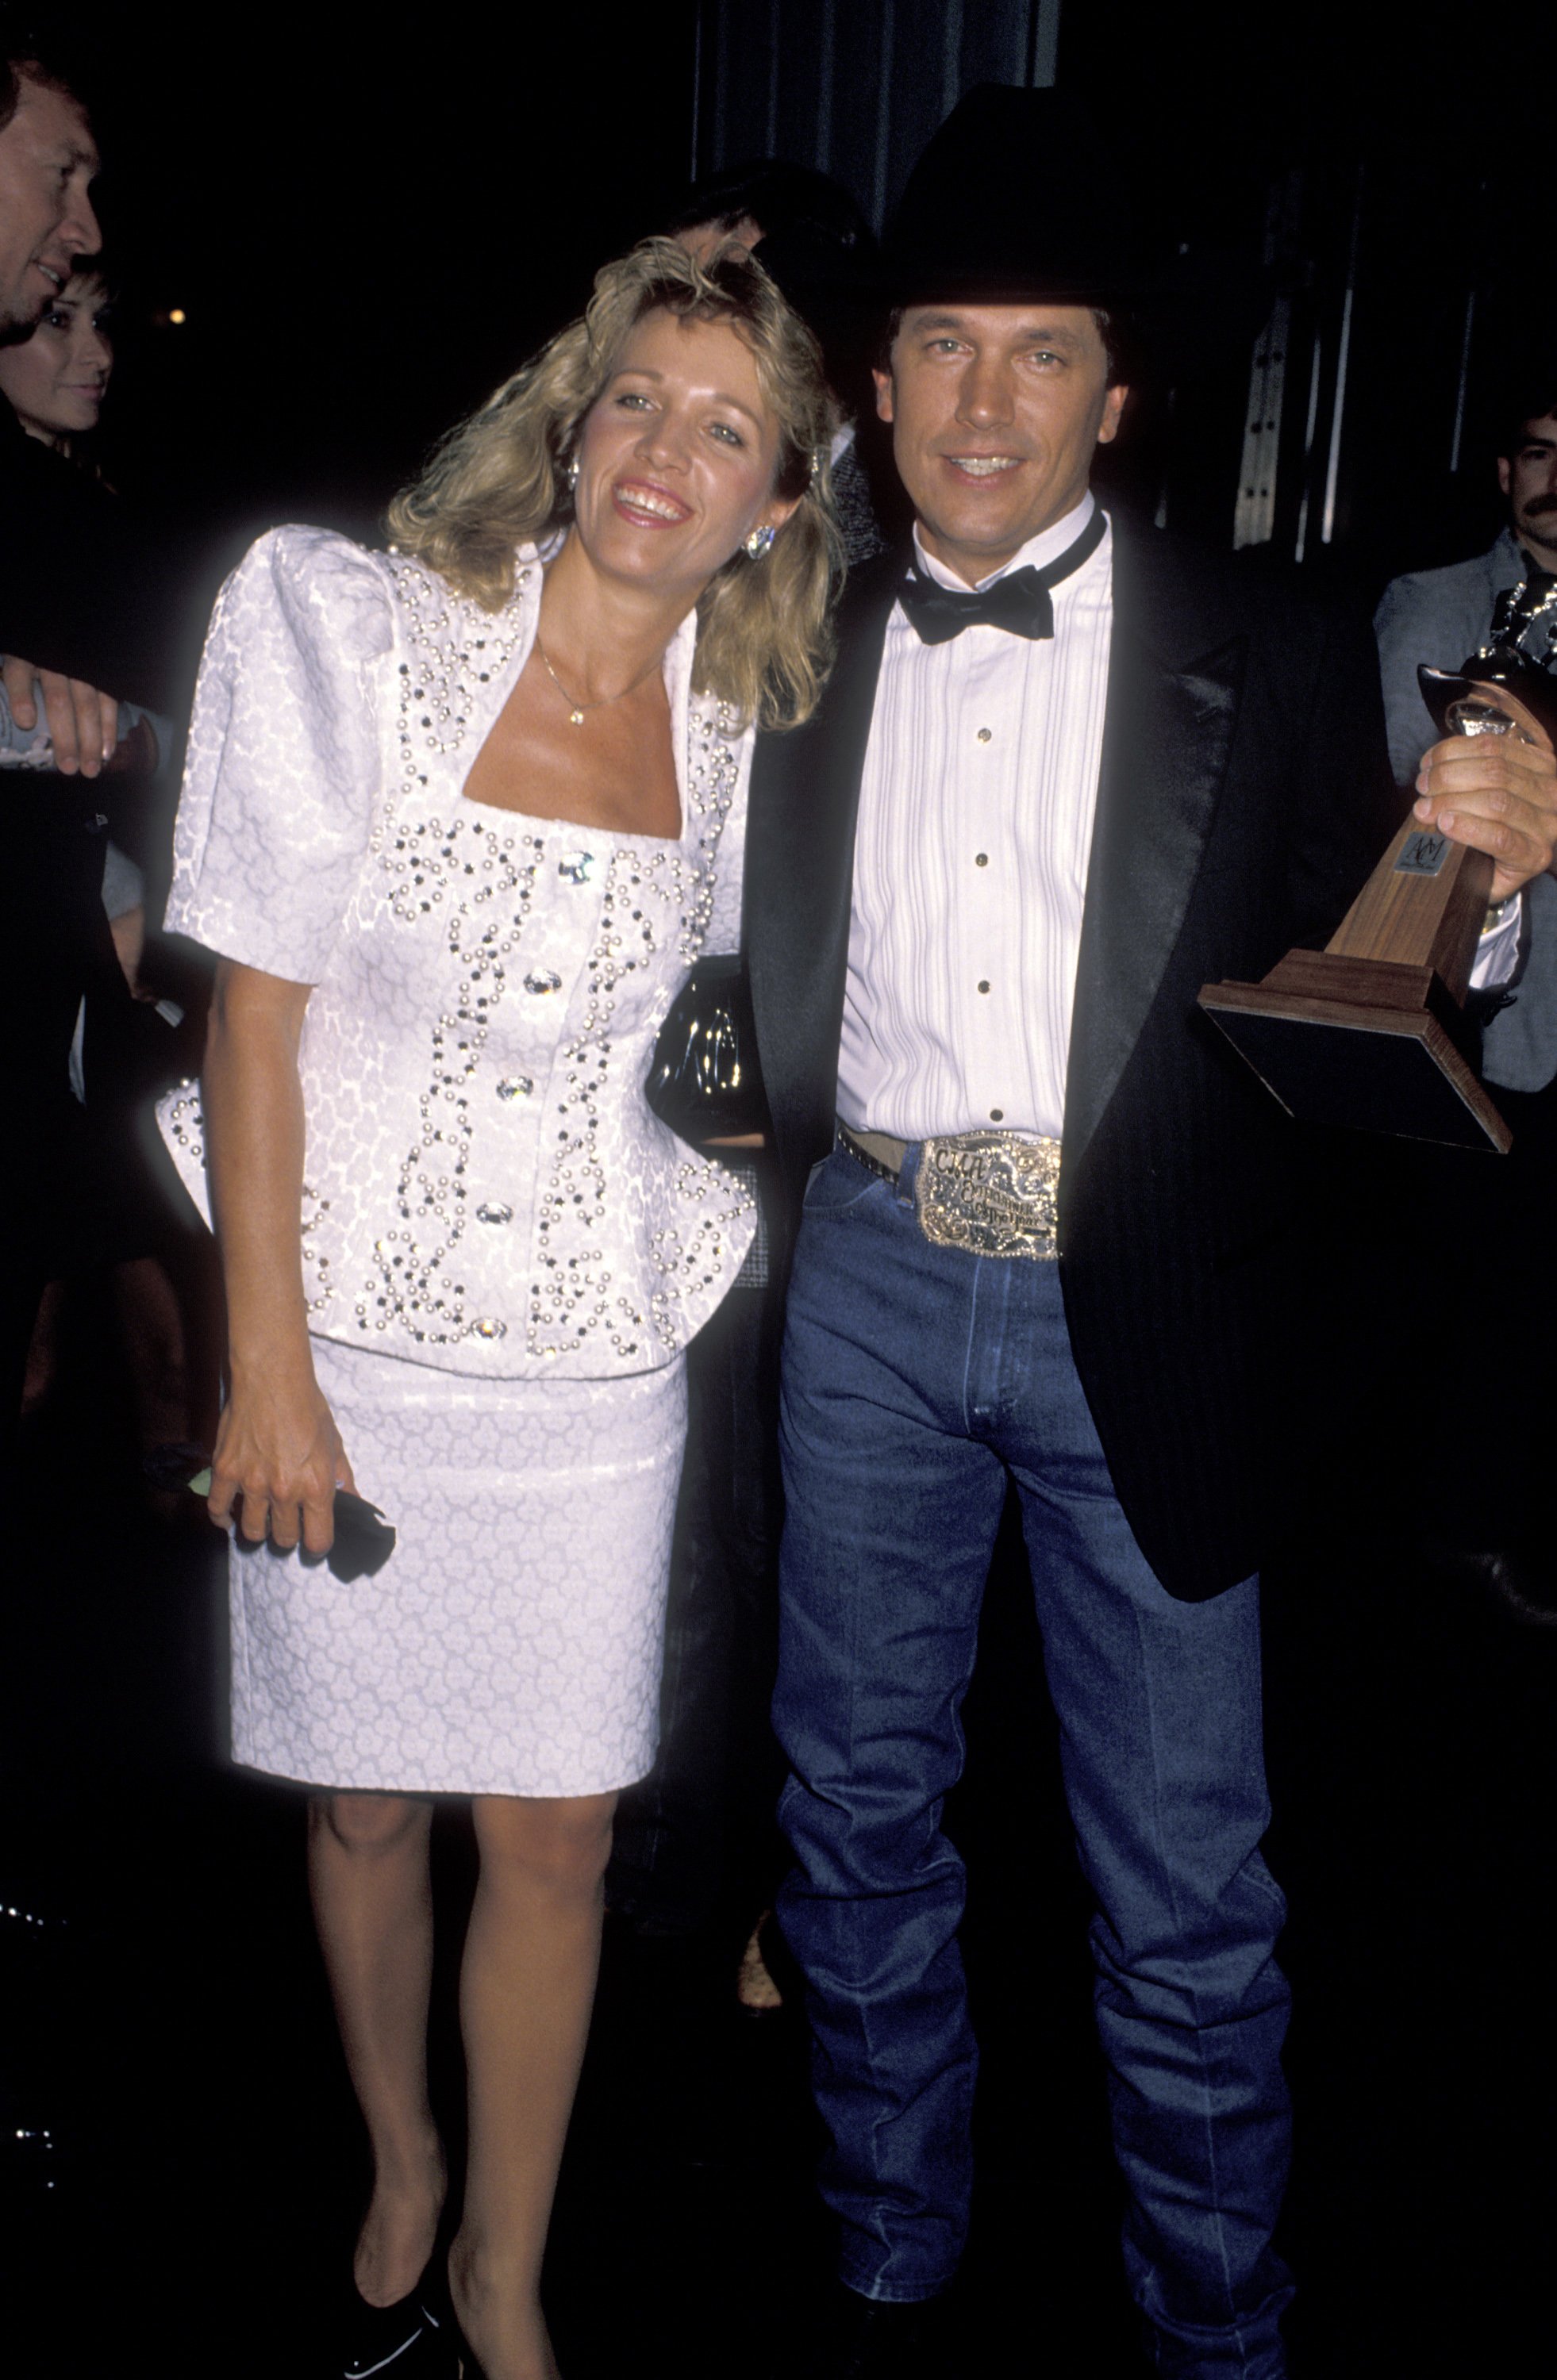 Country singer George Strait and his wife Norma at the Pantages Theatre in Hollywood California | Source: Getty Images